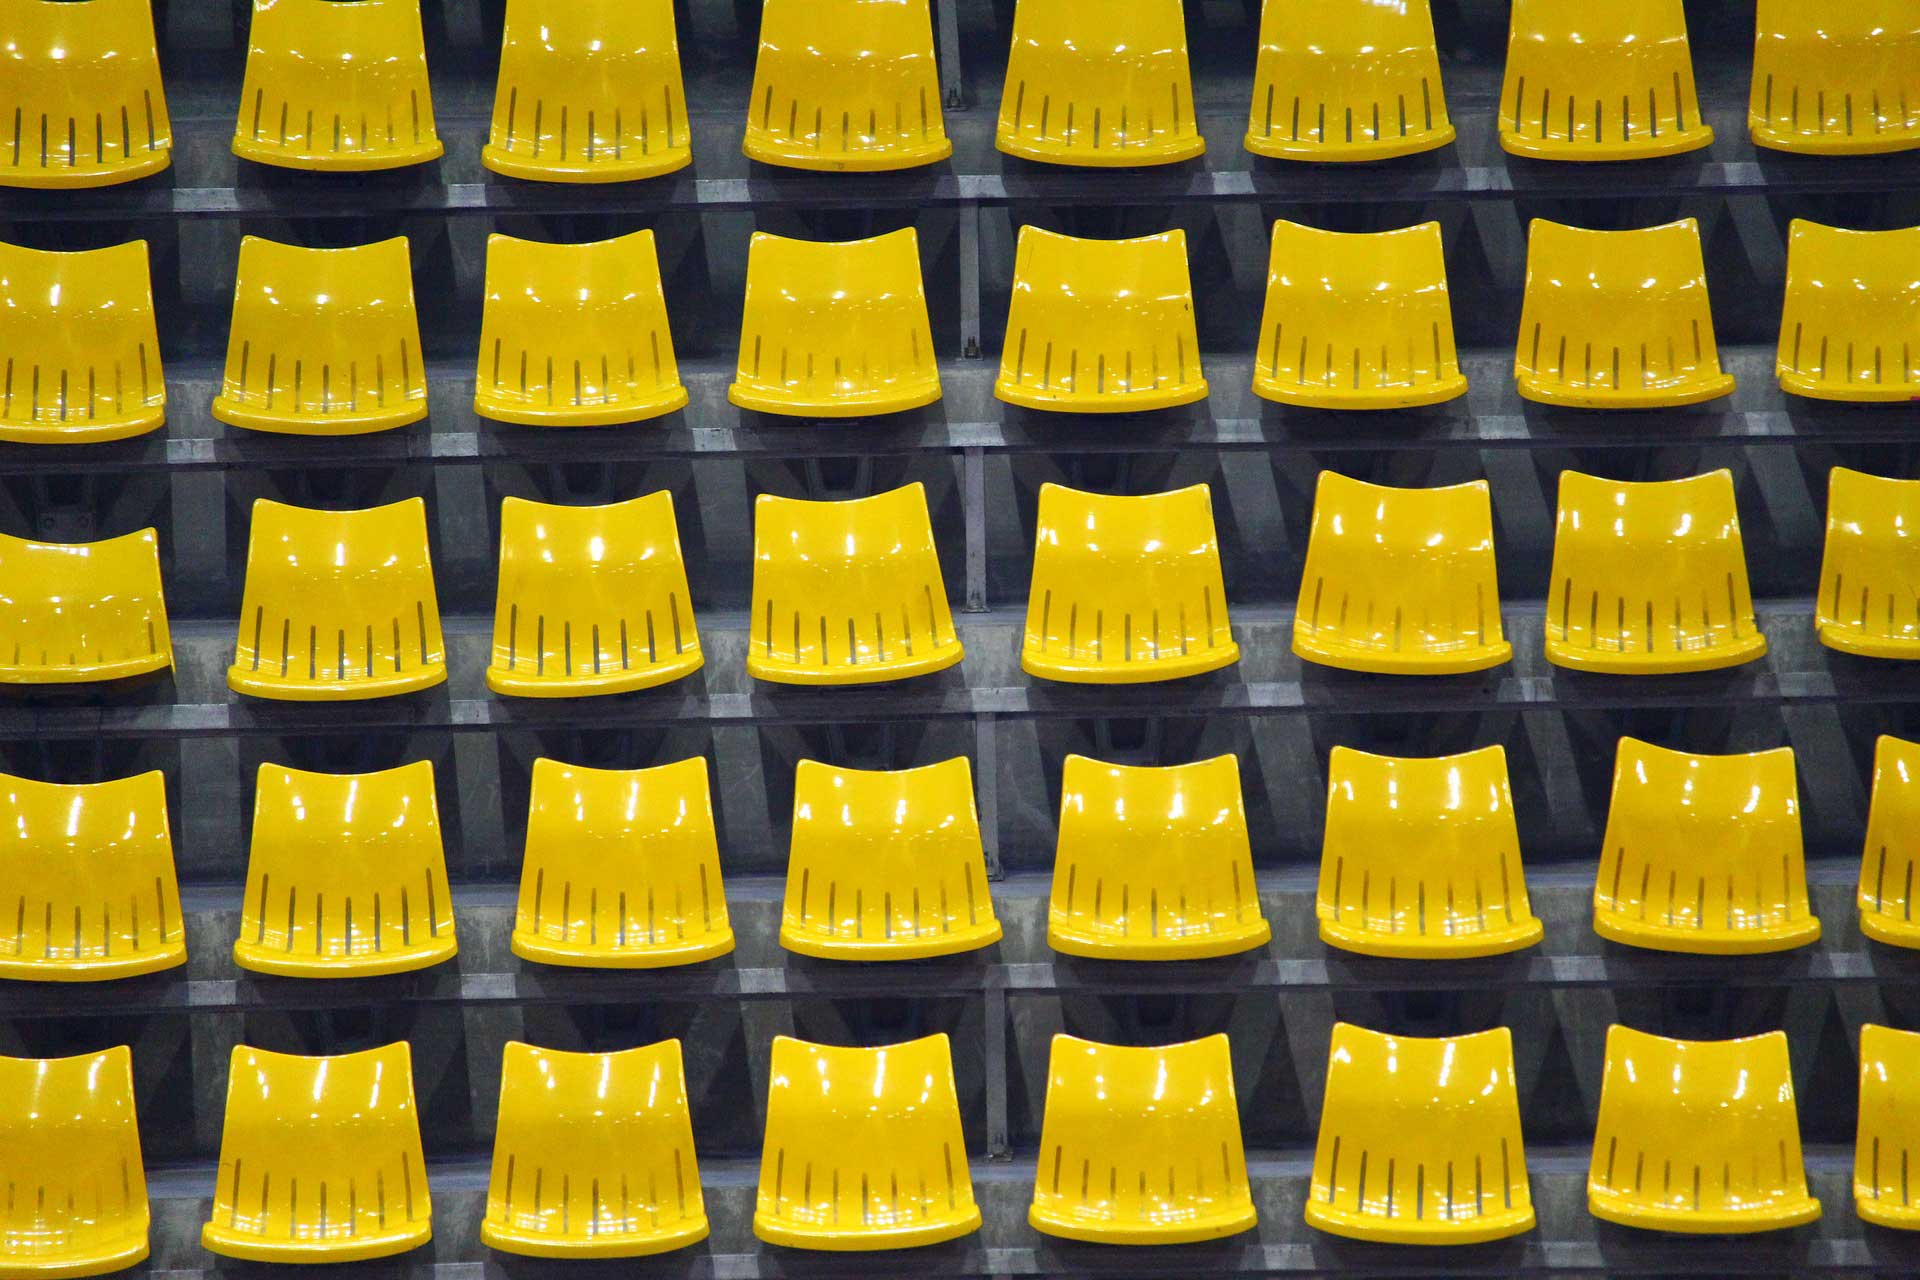 Banner image of yellow chairs aligned in multiple rows and columns